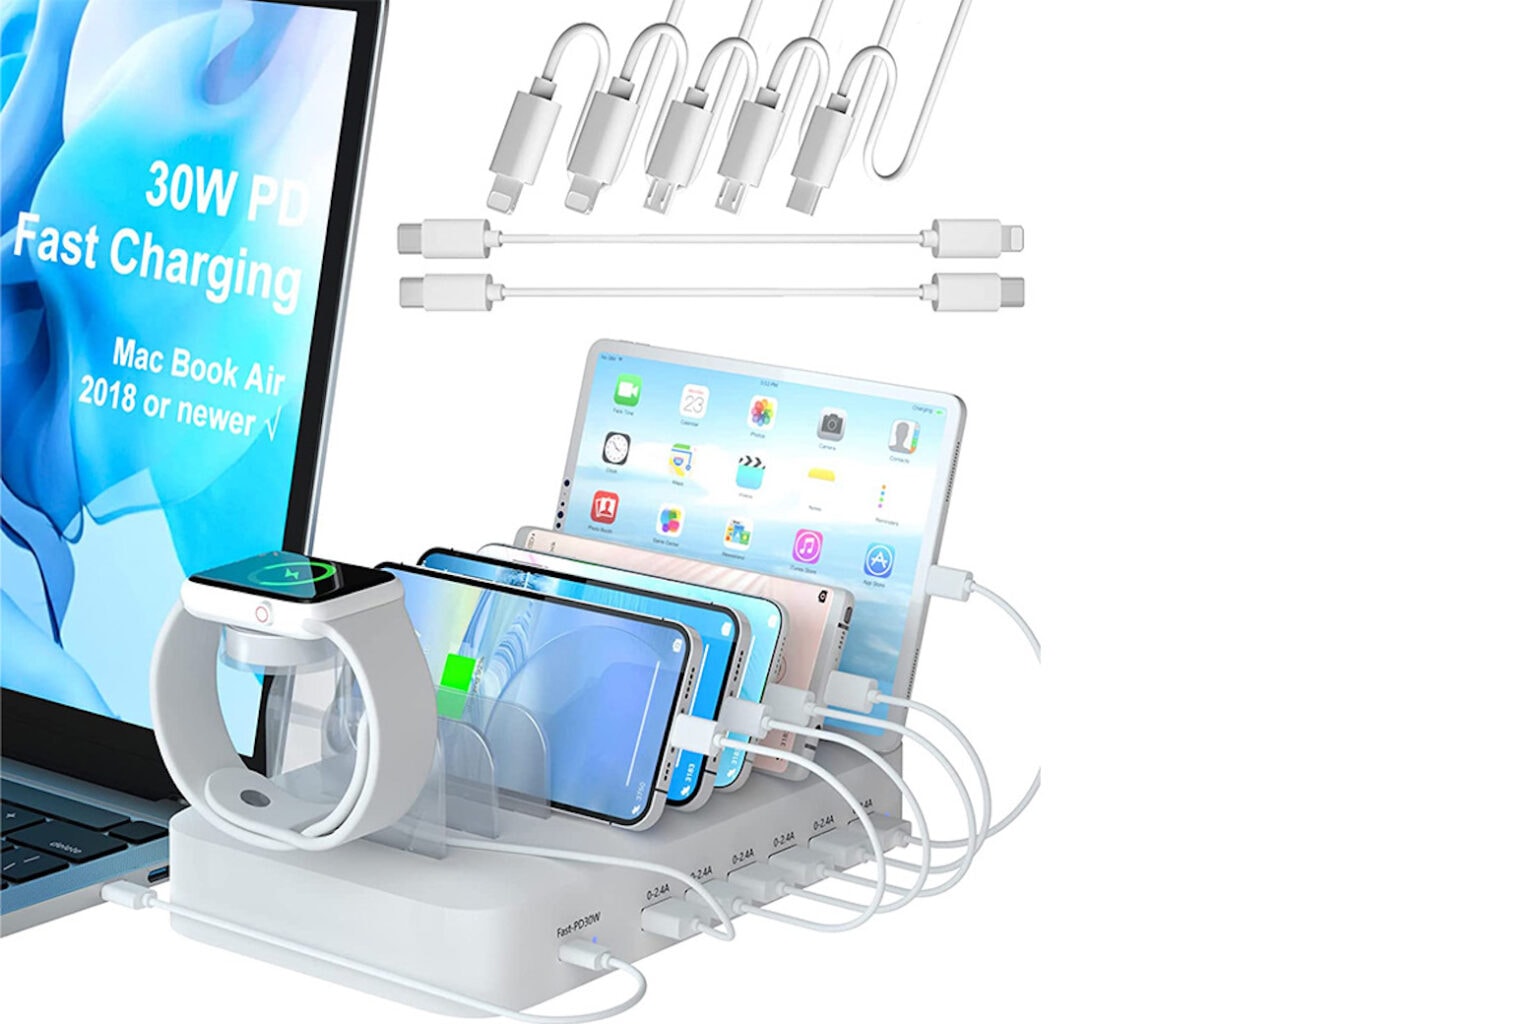 Get power for all your devices with this 7-port charging station, now only $60.